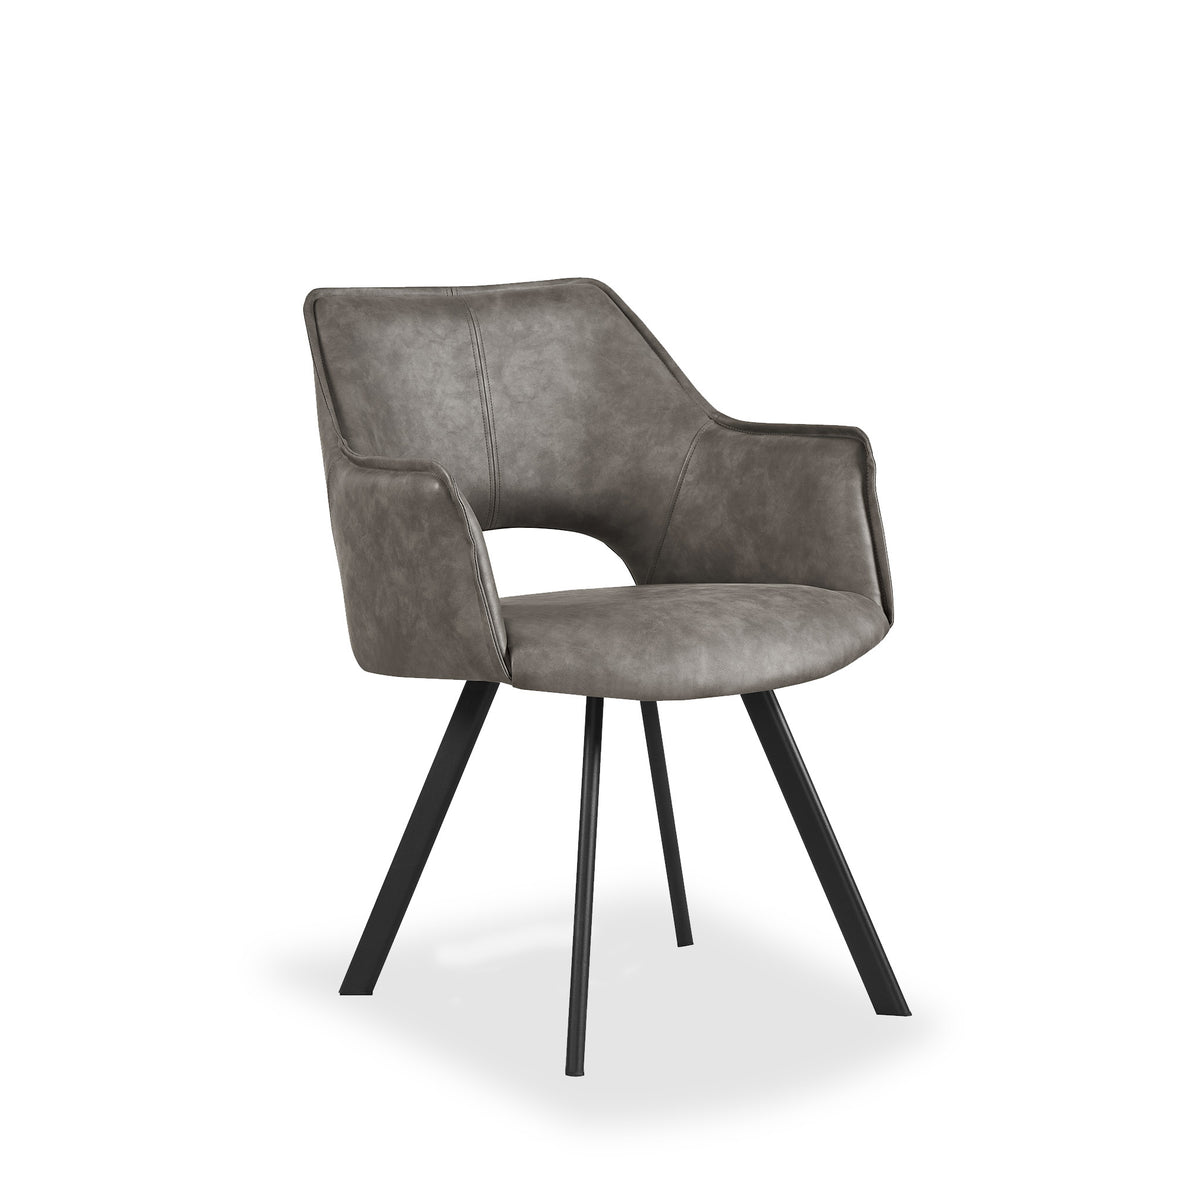 Harley Light Grey PU Dining Chair by Roseland Furniture